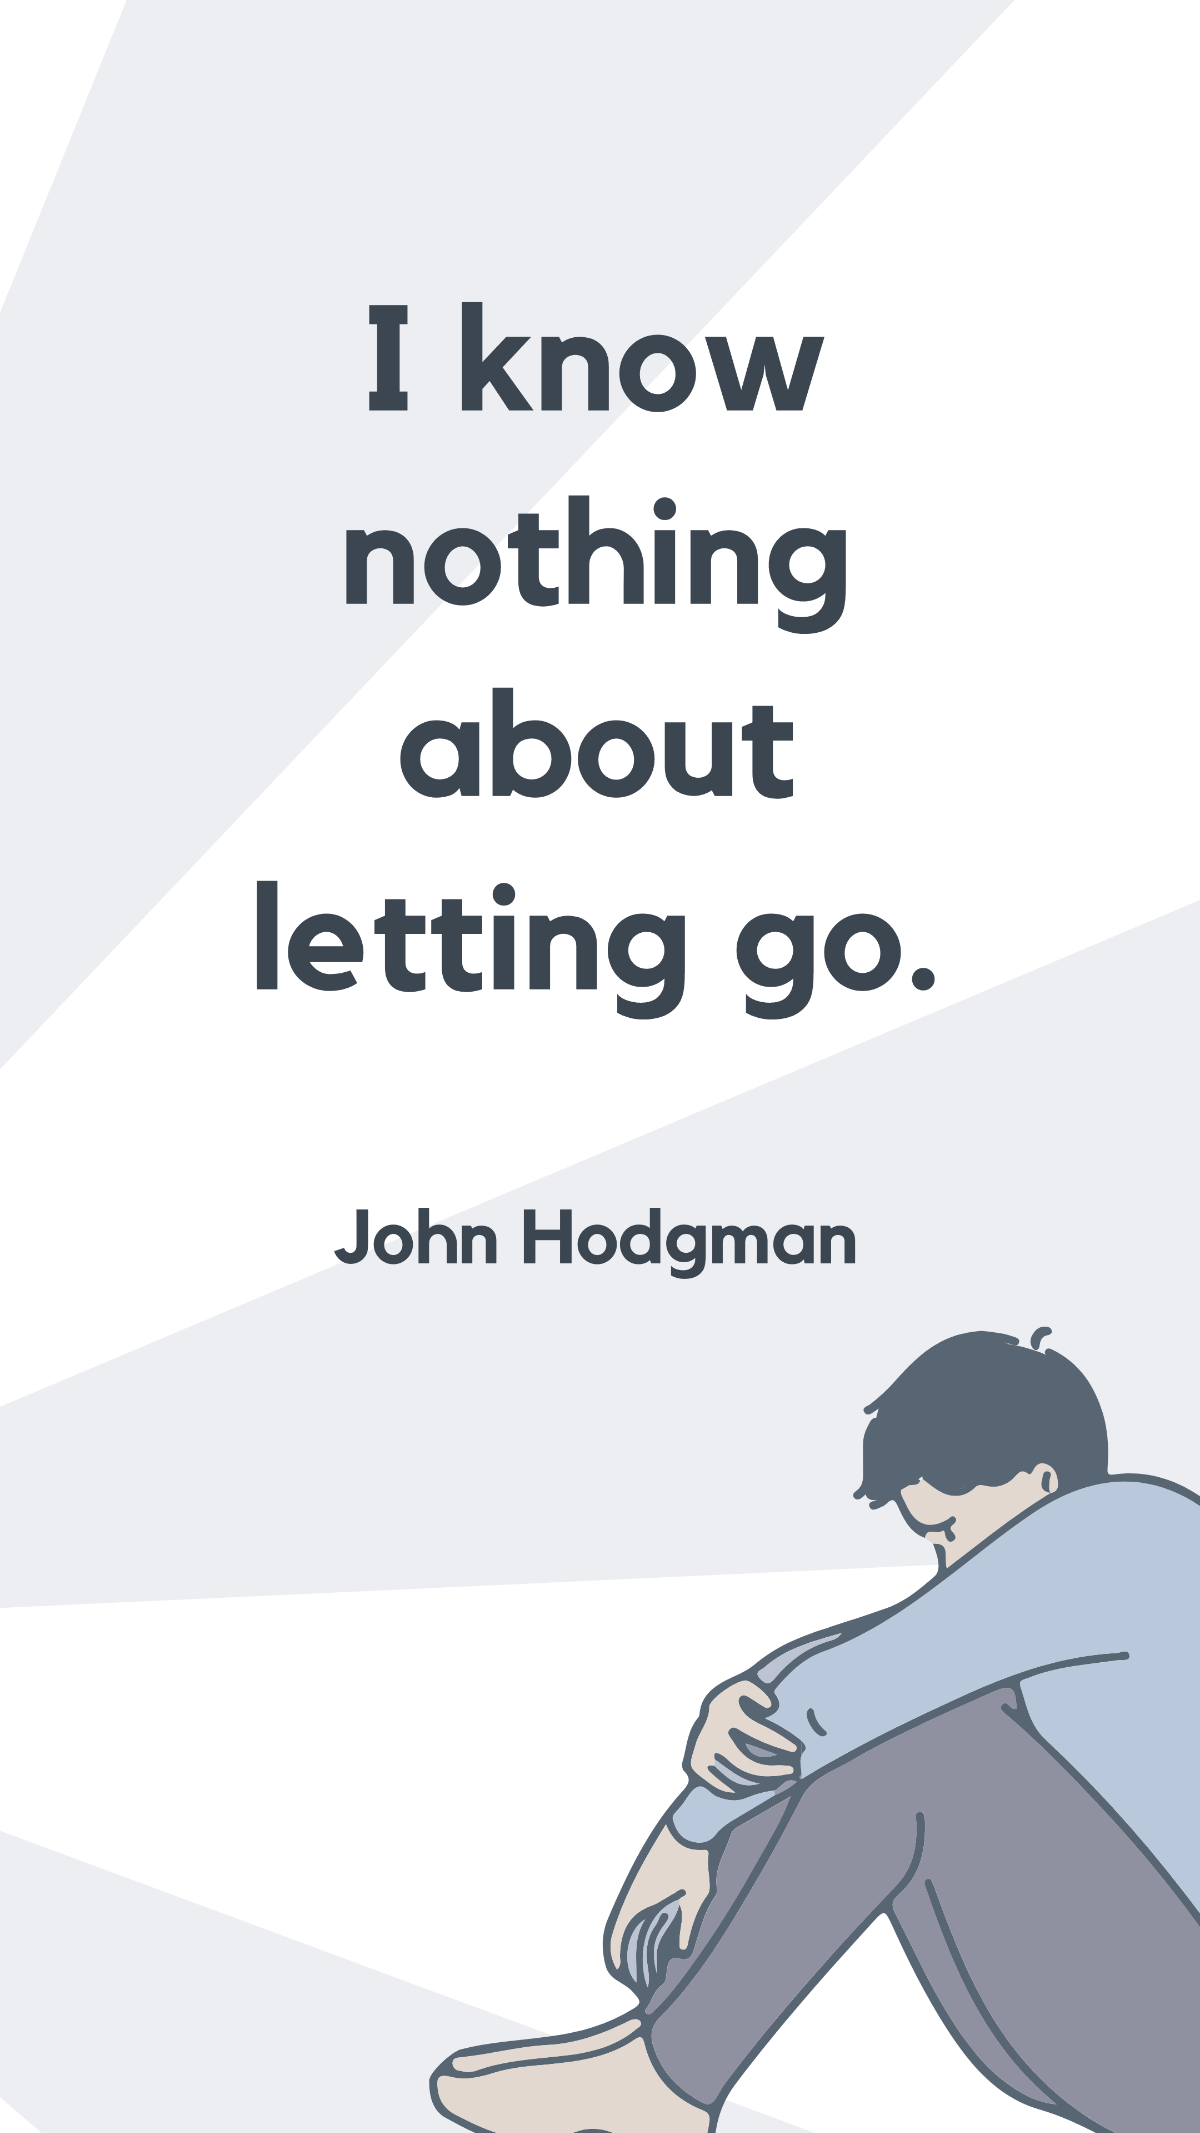 Free John Hodgman - I know nothing about letting go. Template